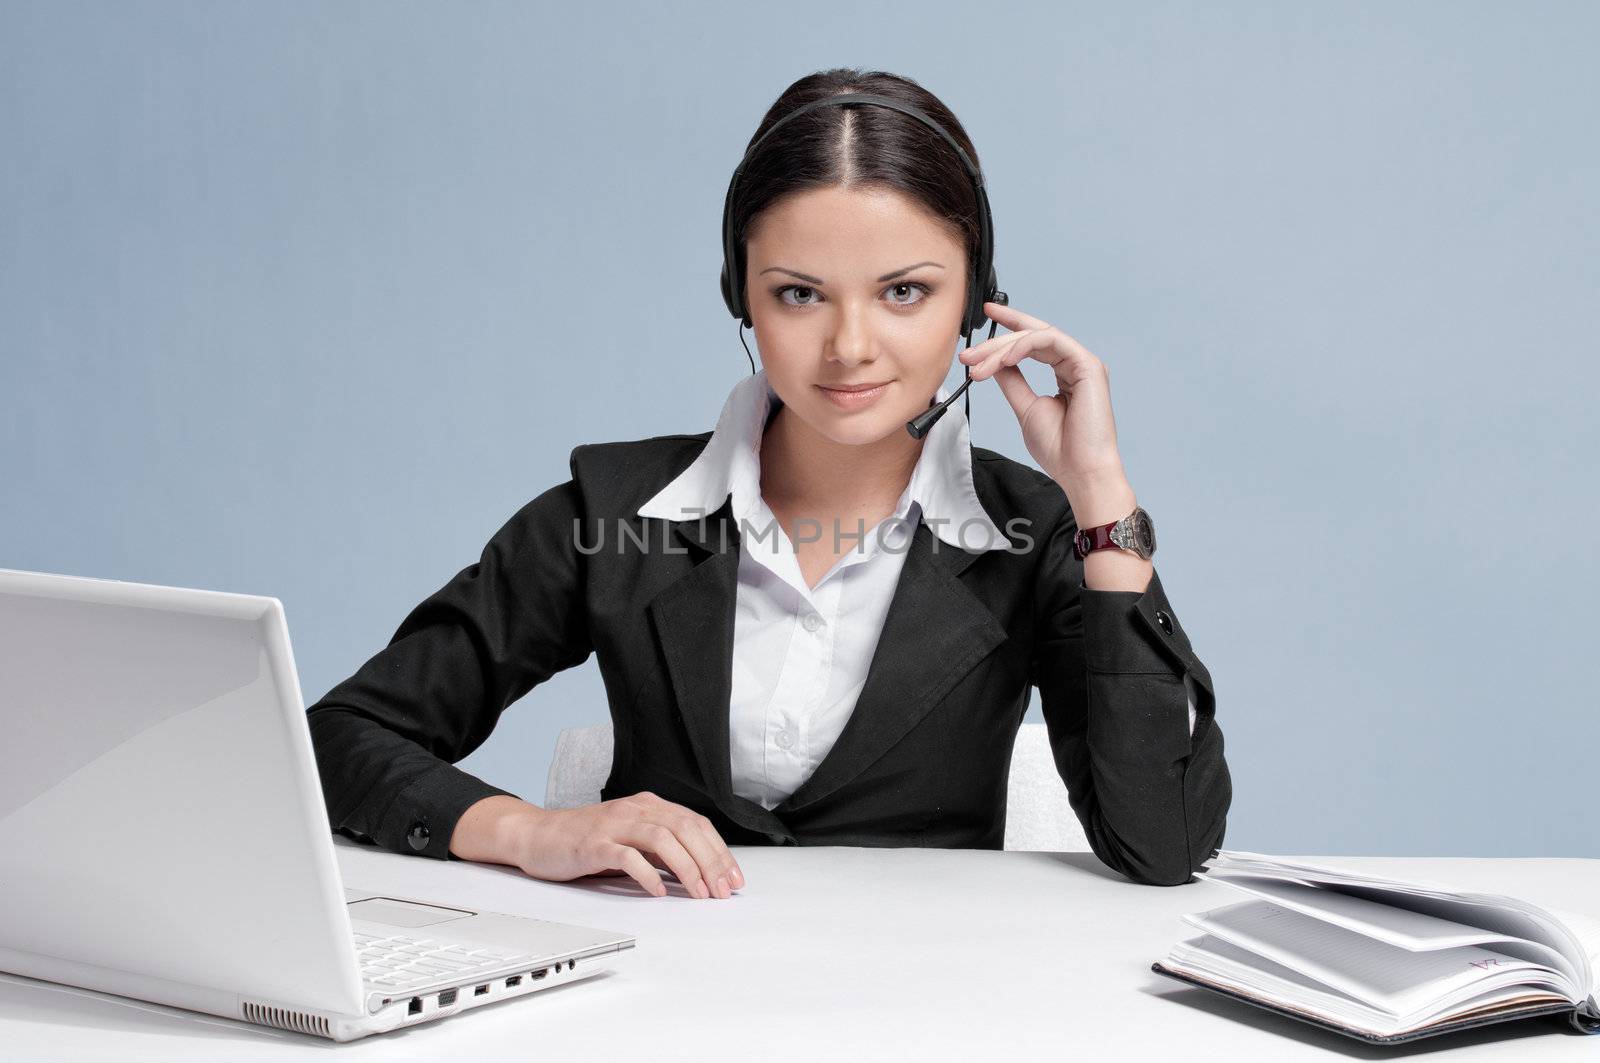 Business woman with headset communication by markin